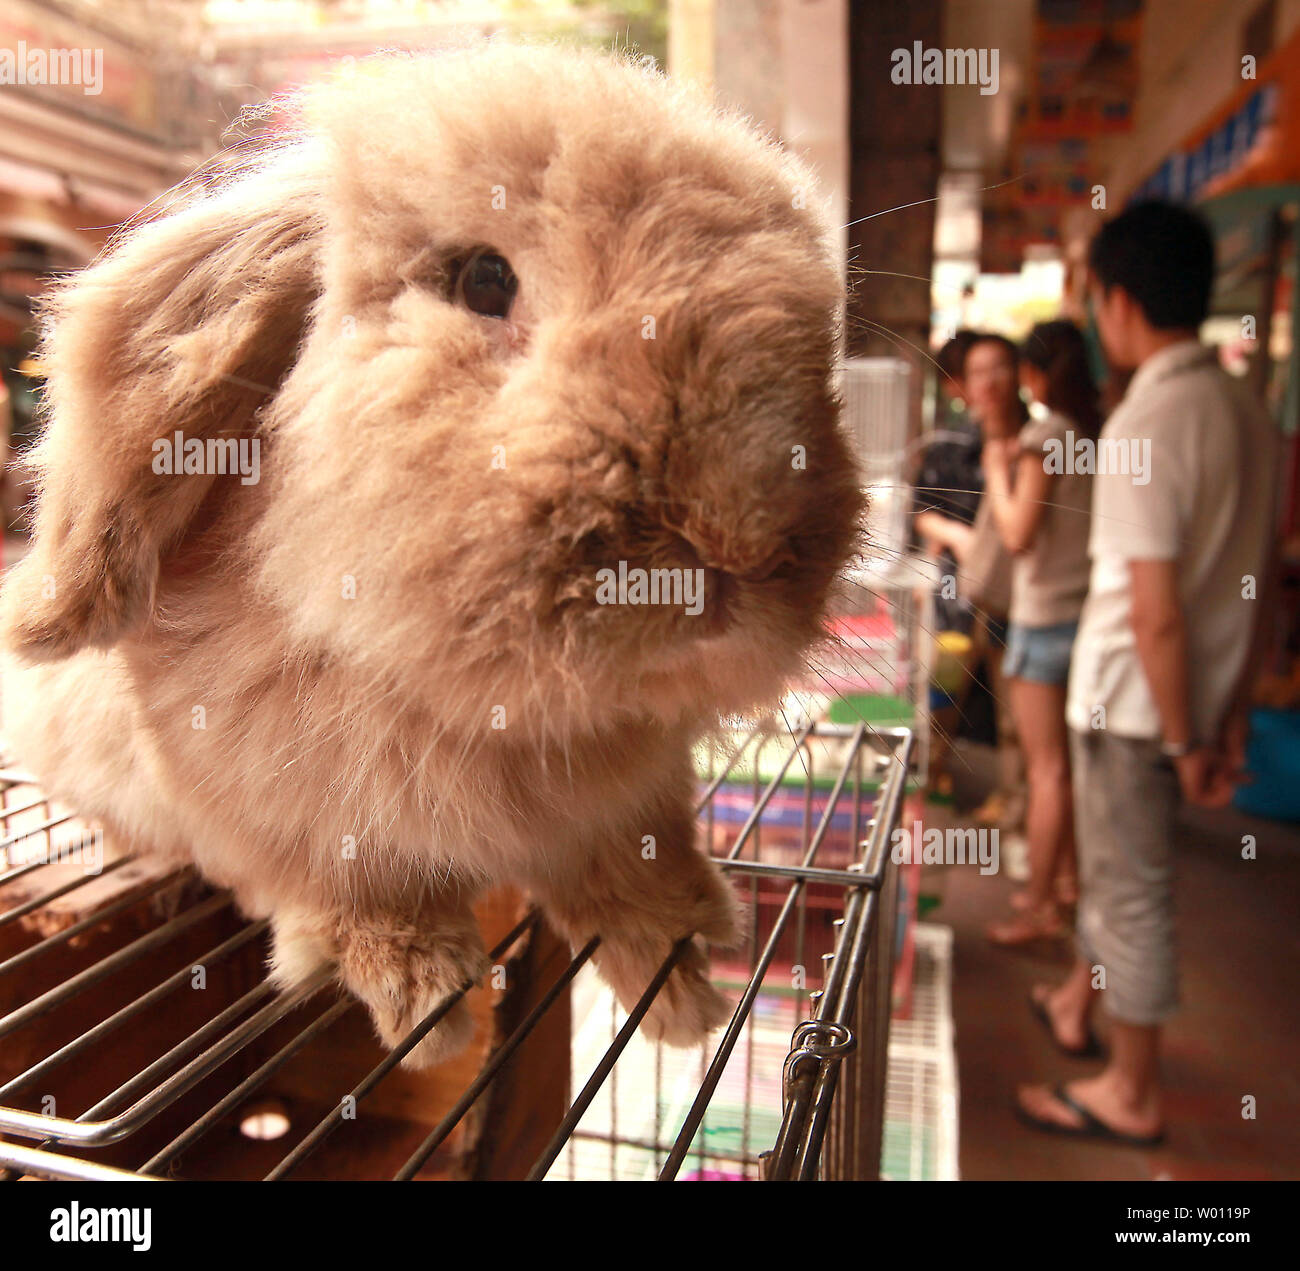 Chinese shoppers look at various animals for sale, including a floppy-eared rabbit, at a shopping center in Beijing, on July 3, 2012.  Only recently in China has the concept of pet ownership become popular, as opposed to buying animals strictly to cook.   UPI/Stephen Shaver Stock Photo